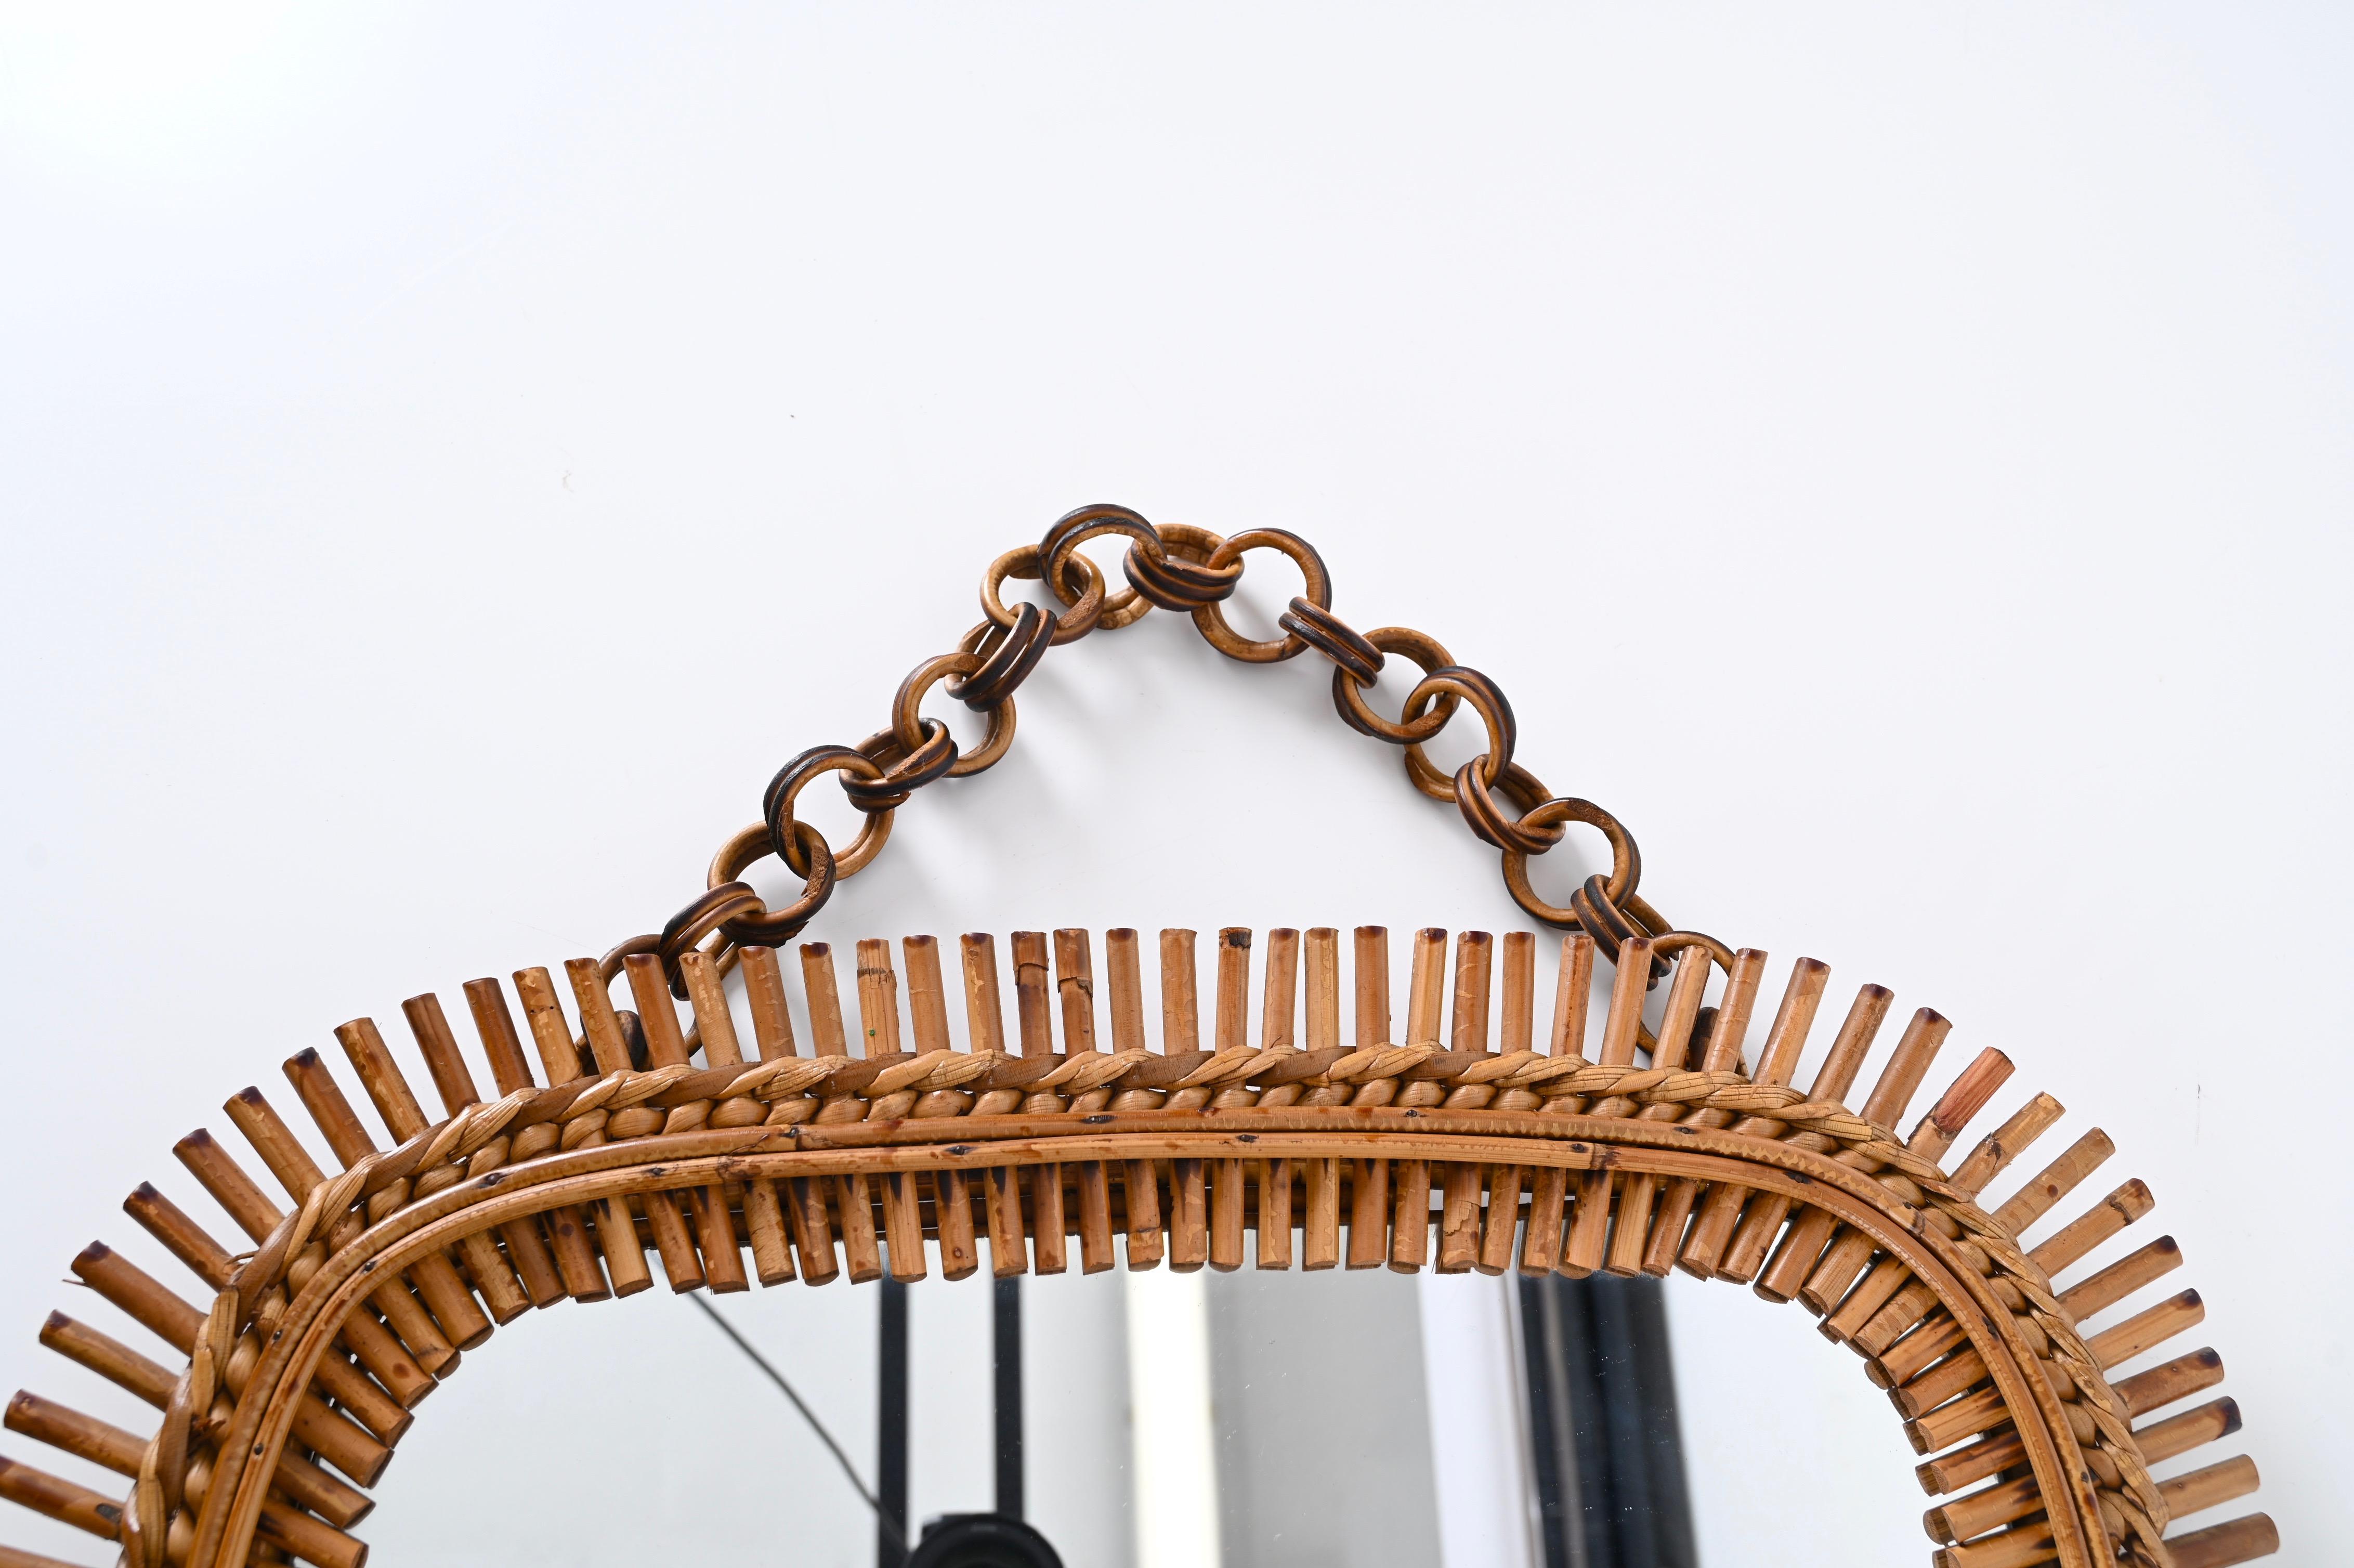 Midcentury French Riviera Square Wall Mirror in Bamboo and Rattan, Italy 1960s For Sale 5